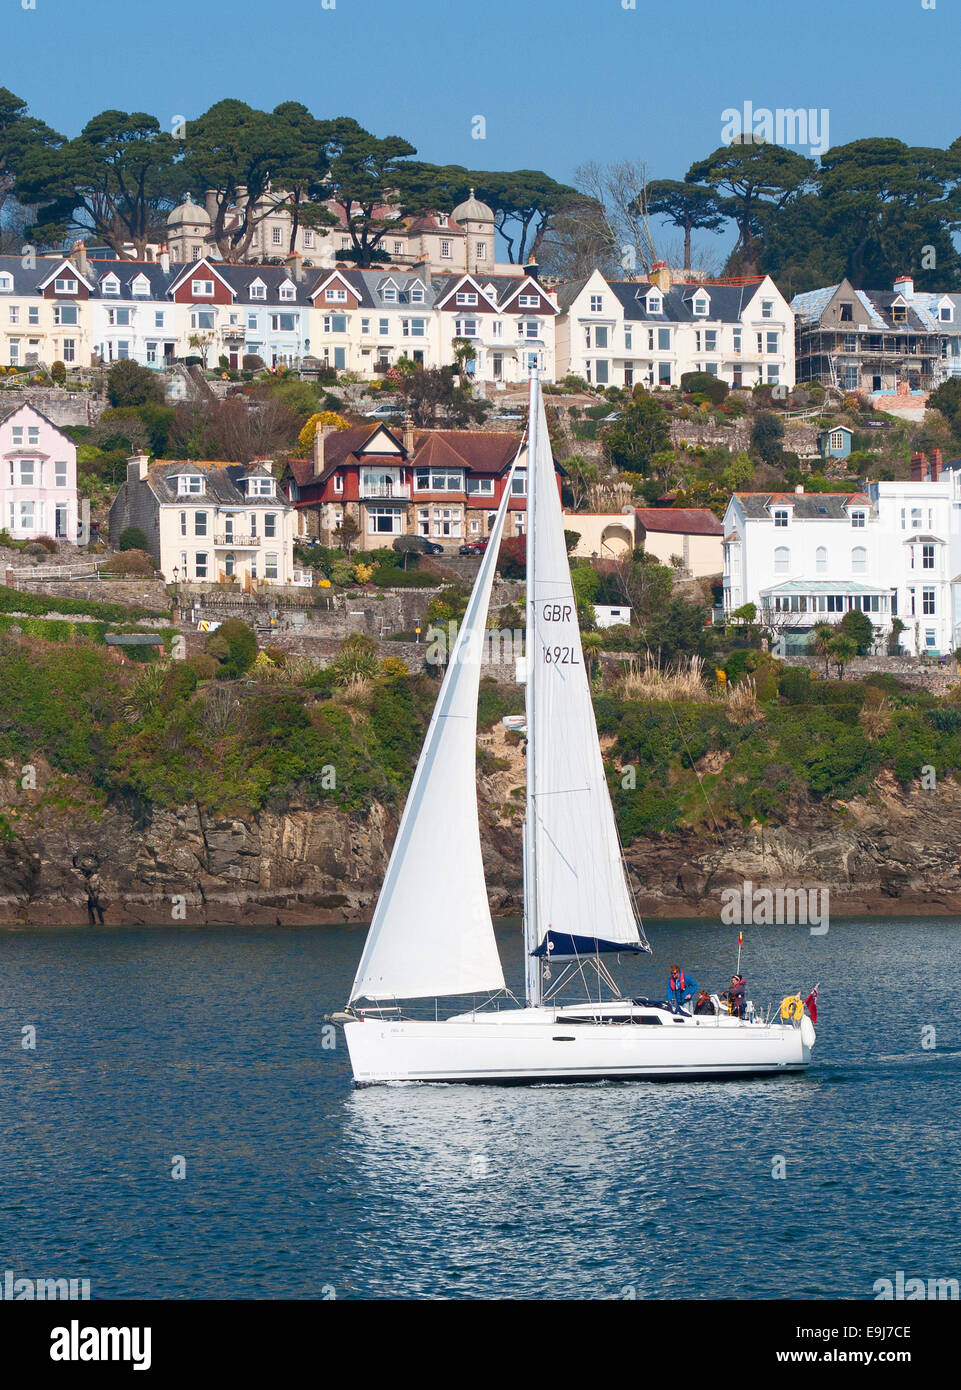 A Yacht sailing on the River Fowey in Cornwall, UK Stock Photo